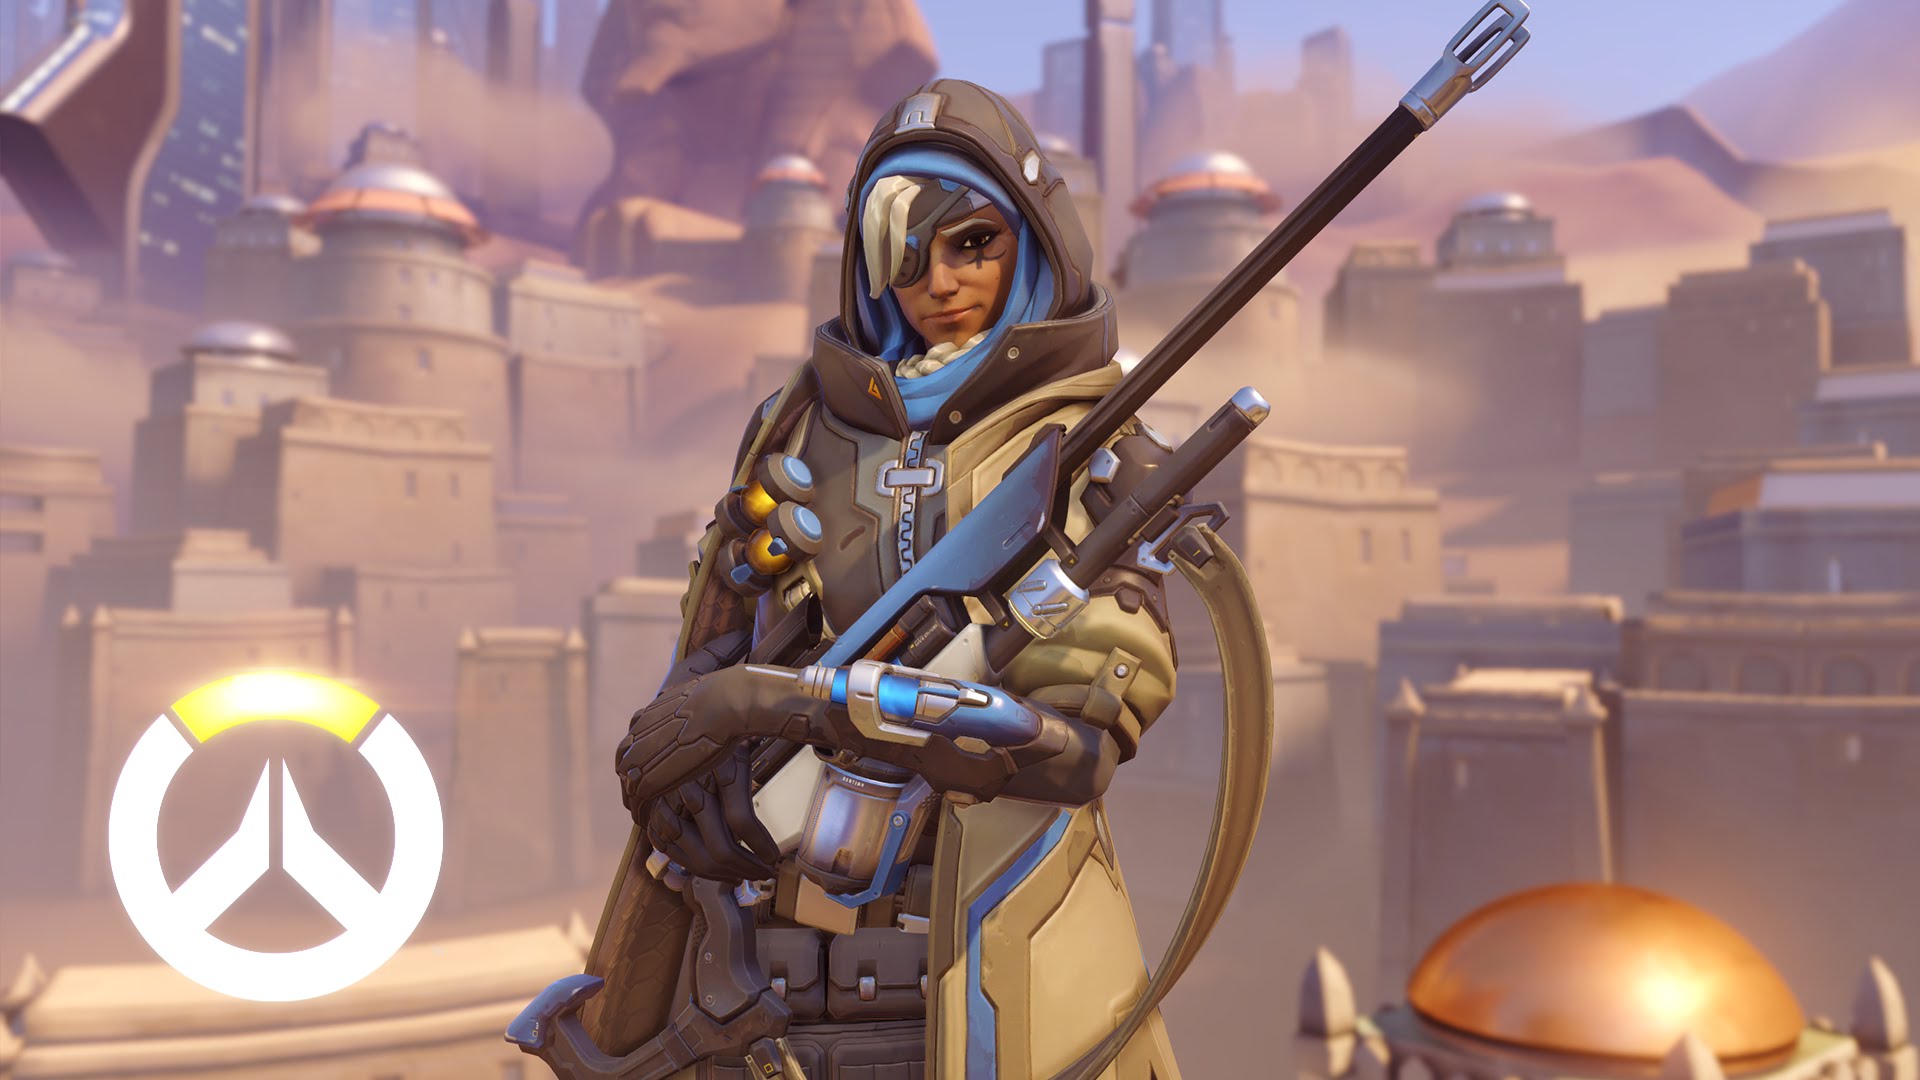 See Overwatch's New Hero, Ana, in Action